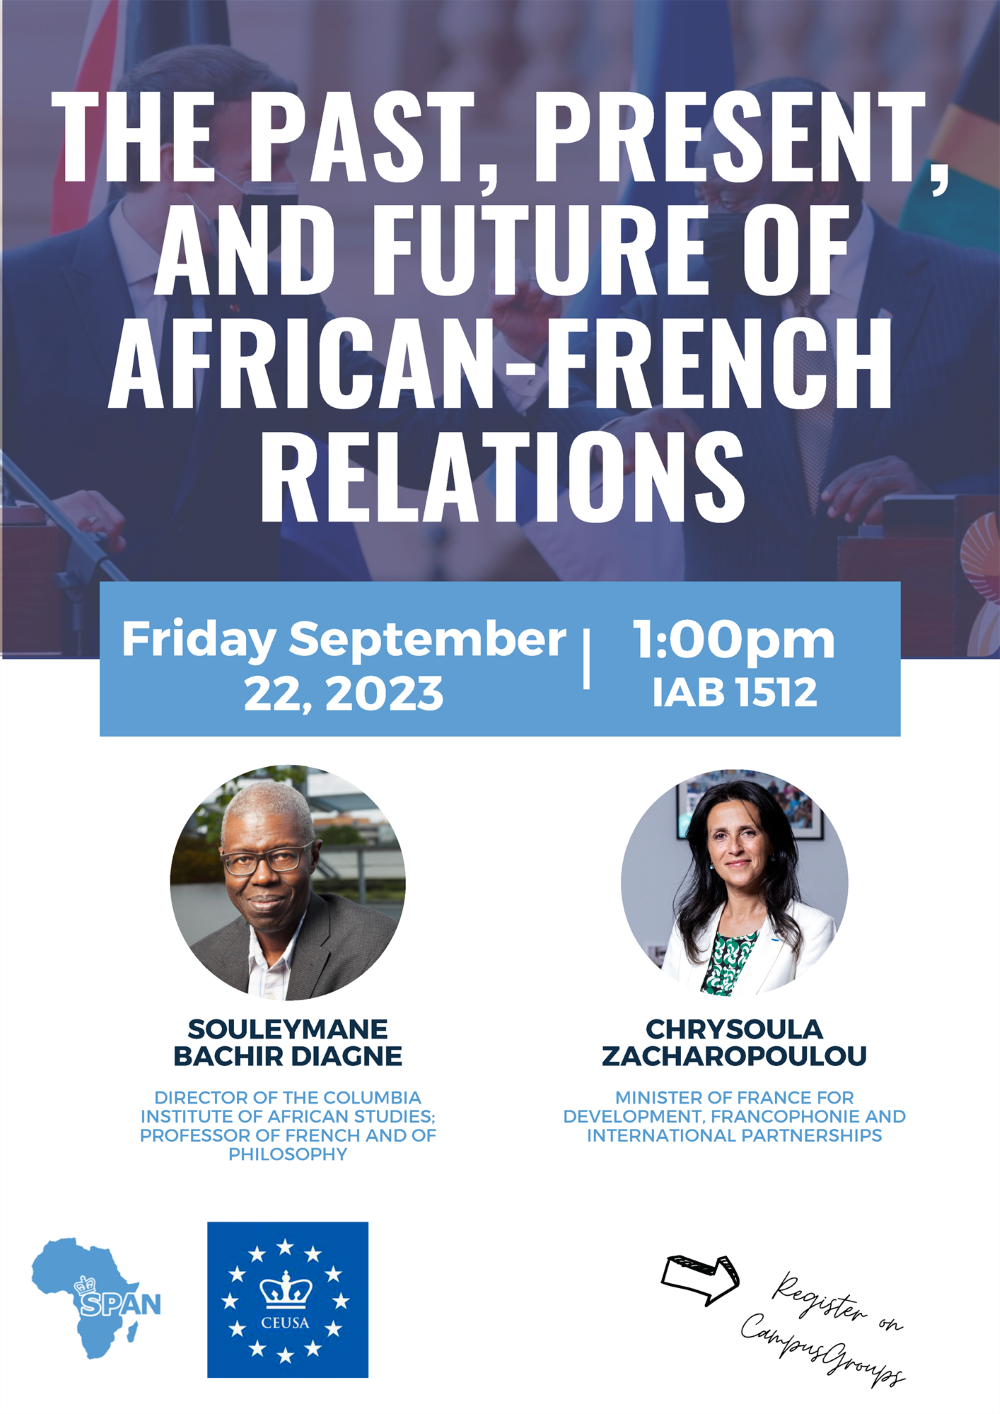 SIPA Pan-African Relations Flier: Friday September 22, 2023 at 1 pm